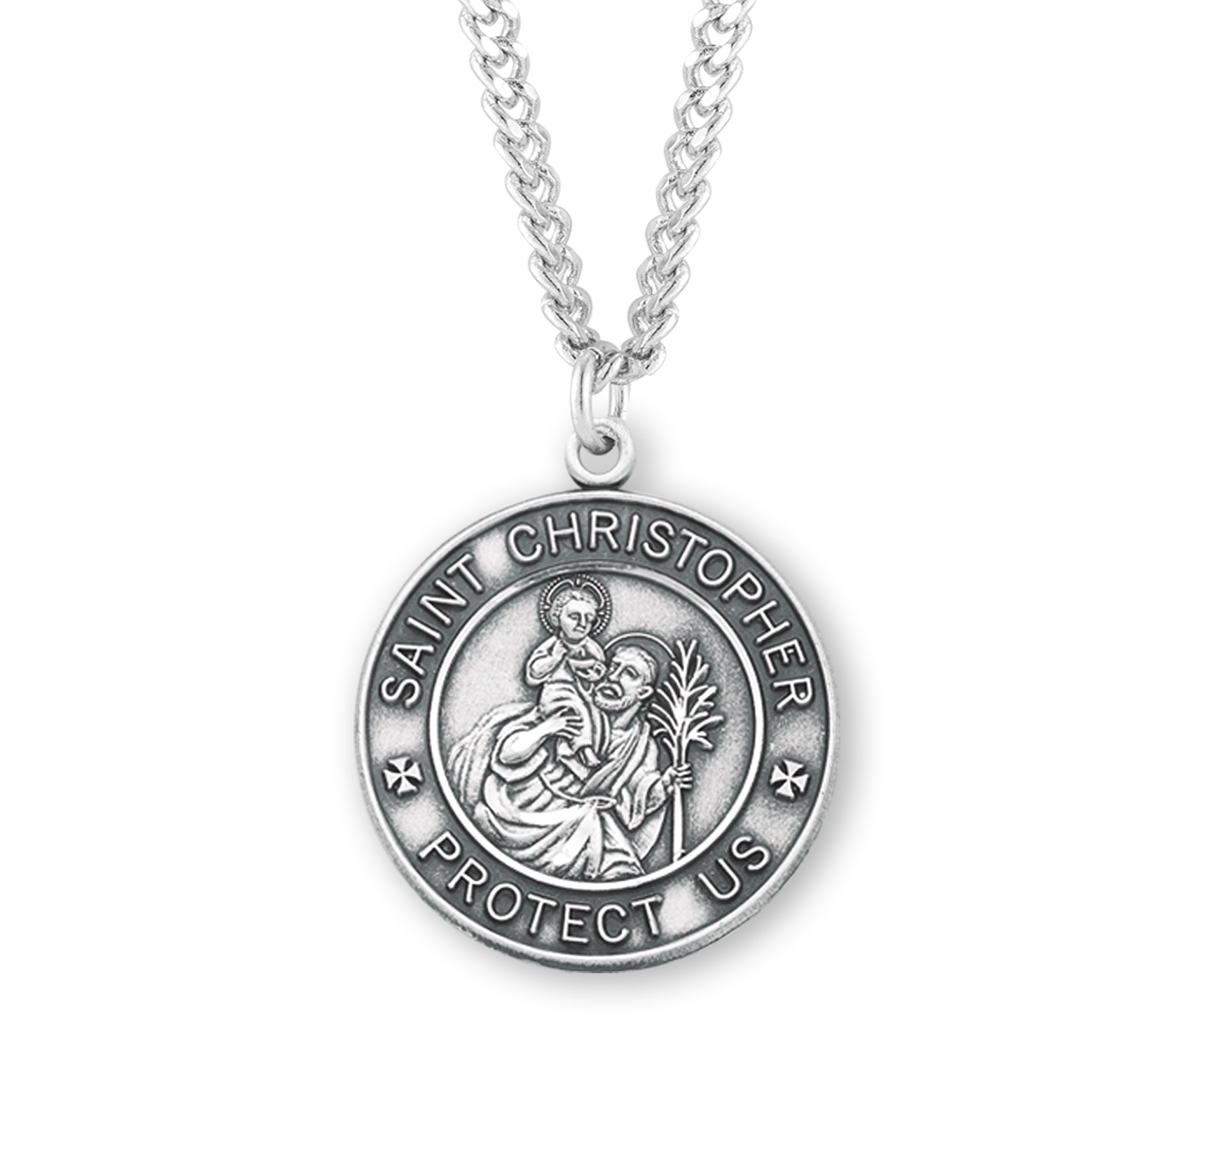 In Gift Bag. 10 12 18 20mm Round 925 Sterling Silver St Christopher Pendant